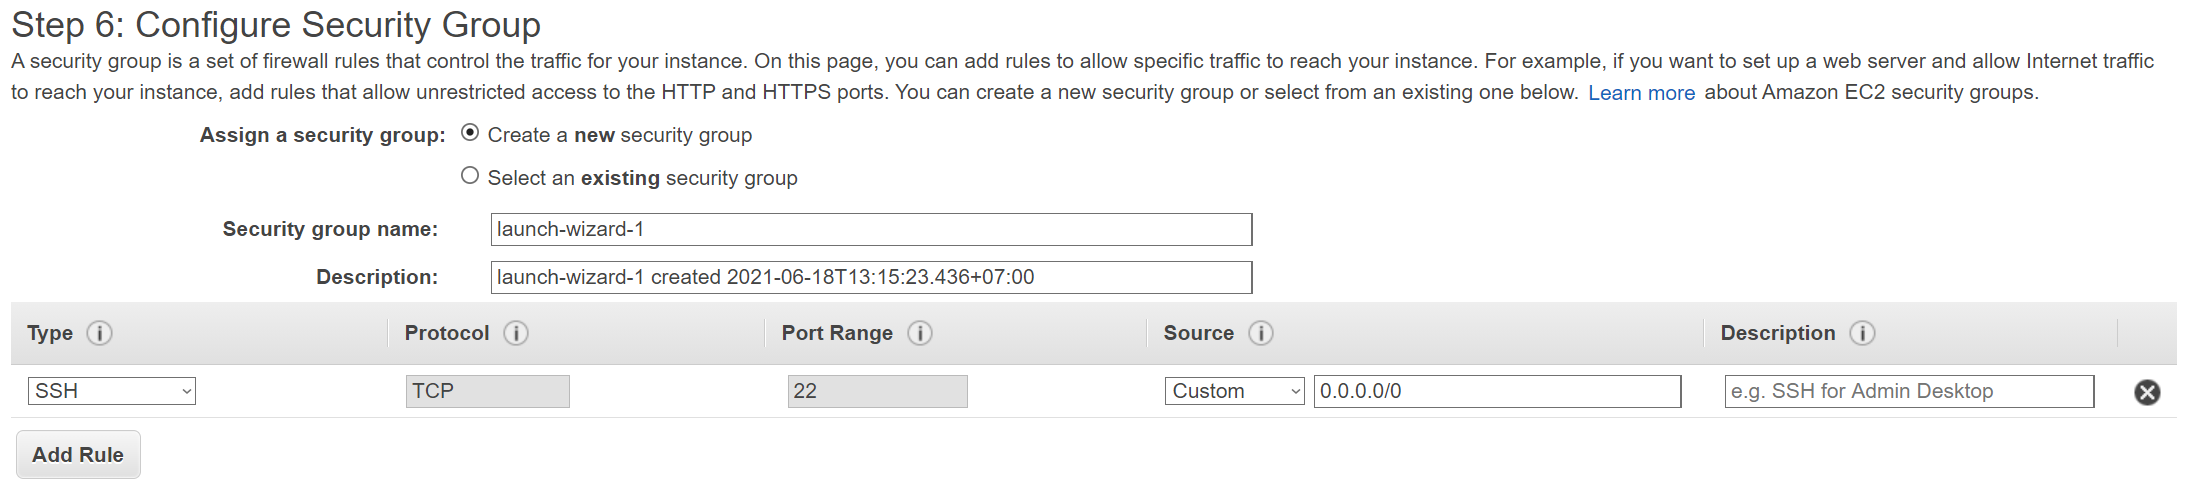 create-new-account-aws-and-own-your-first_cloud-server-ec2-ssh